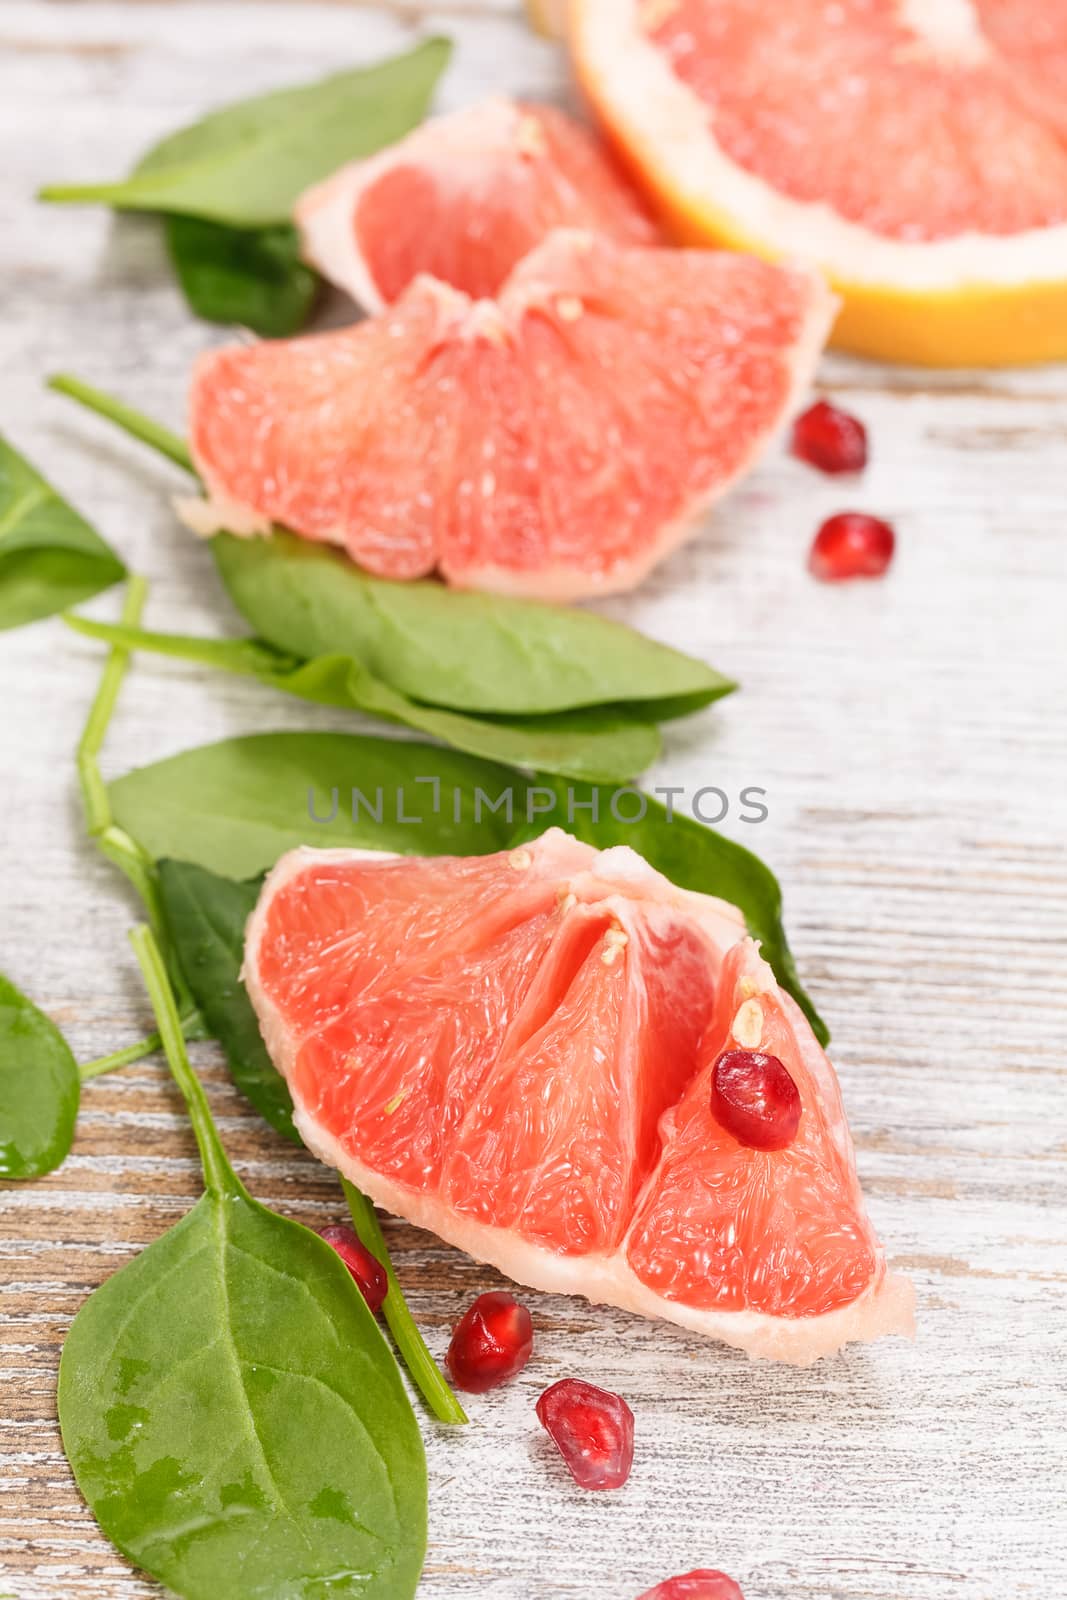 Grapefruit with slices on a wooden table.